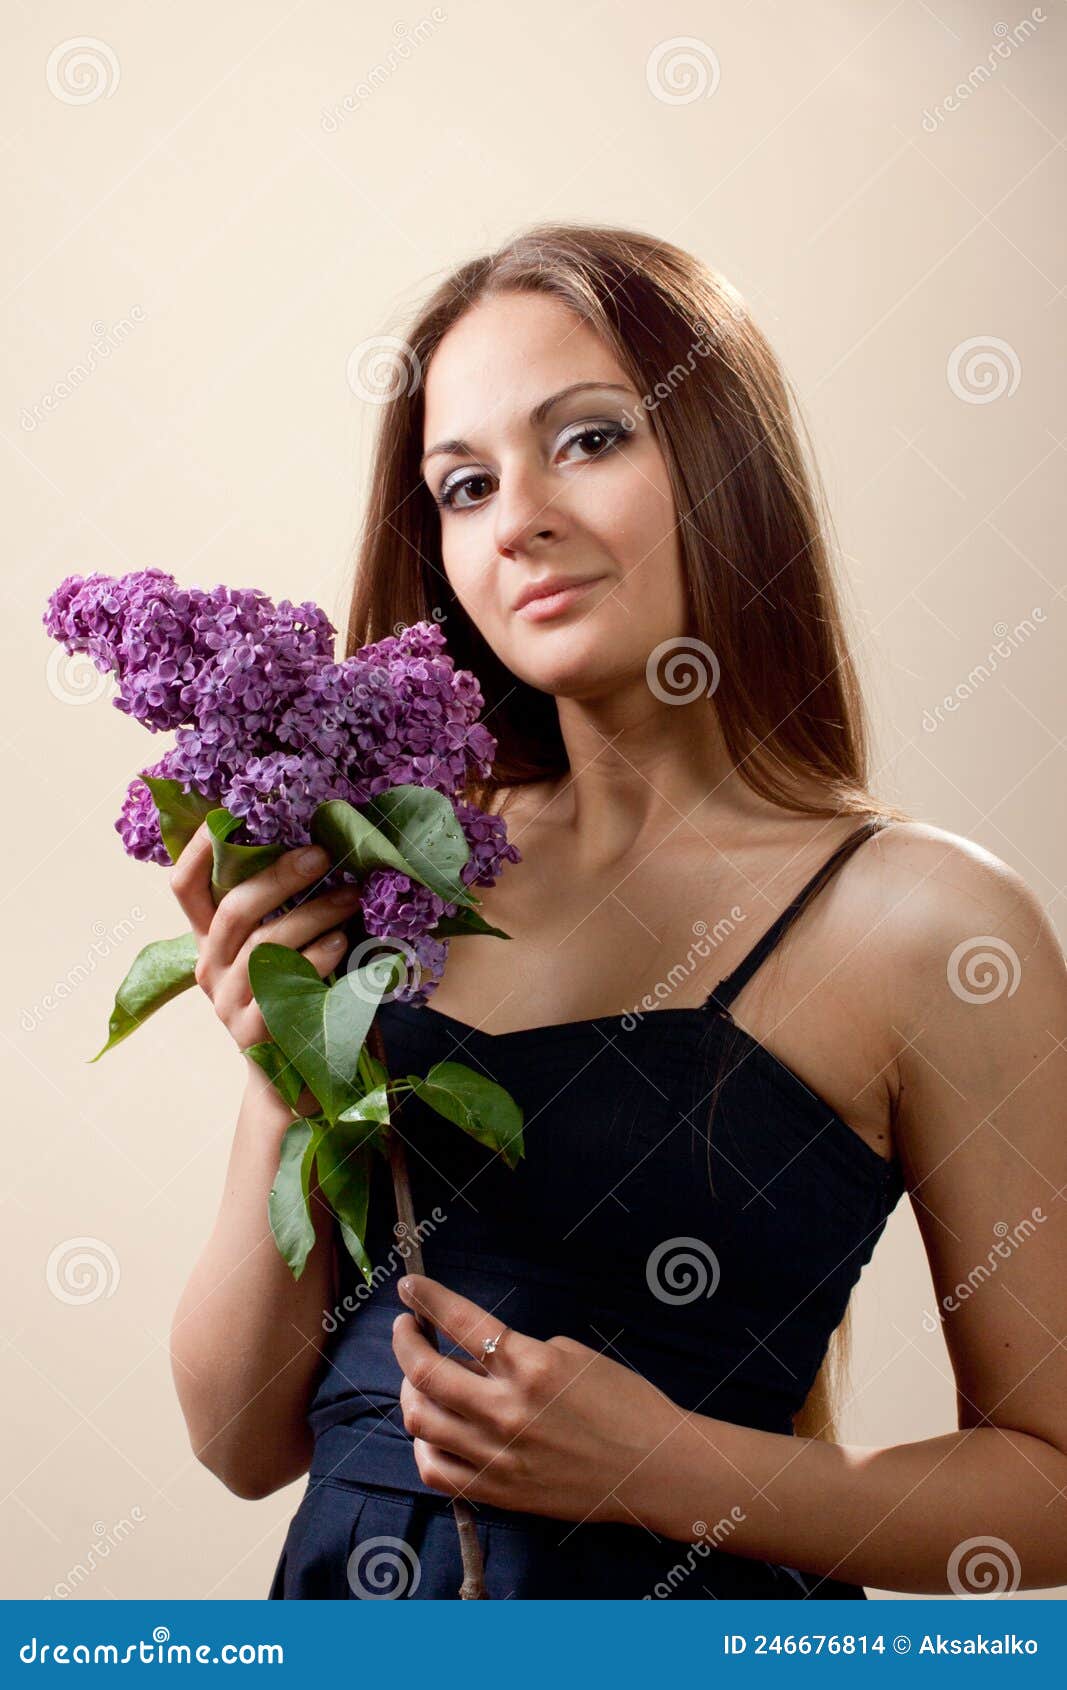 Beautiful Young Girl Weared in Black Dress with a Bouquet of Lilac ...